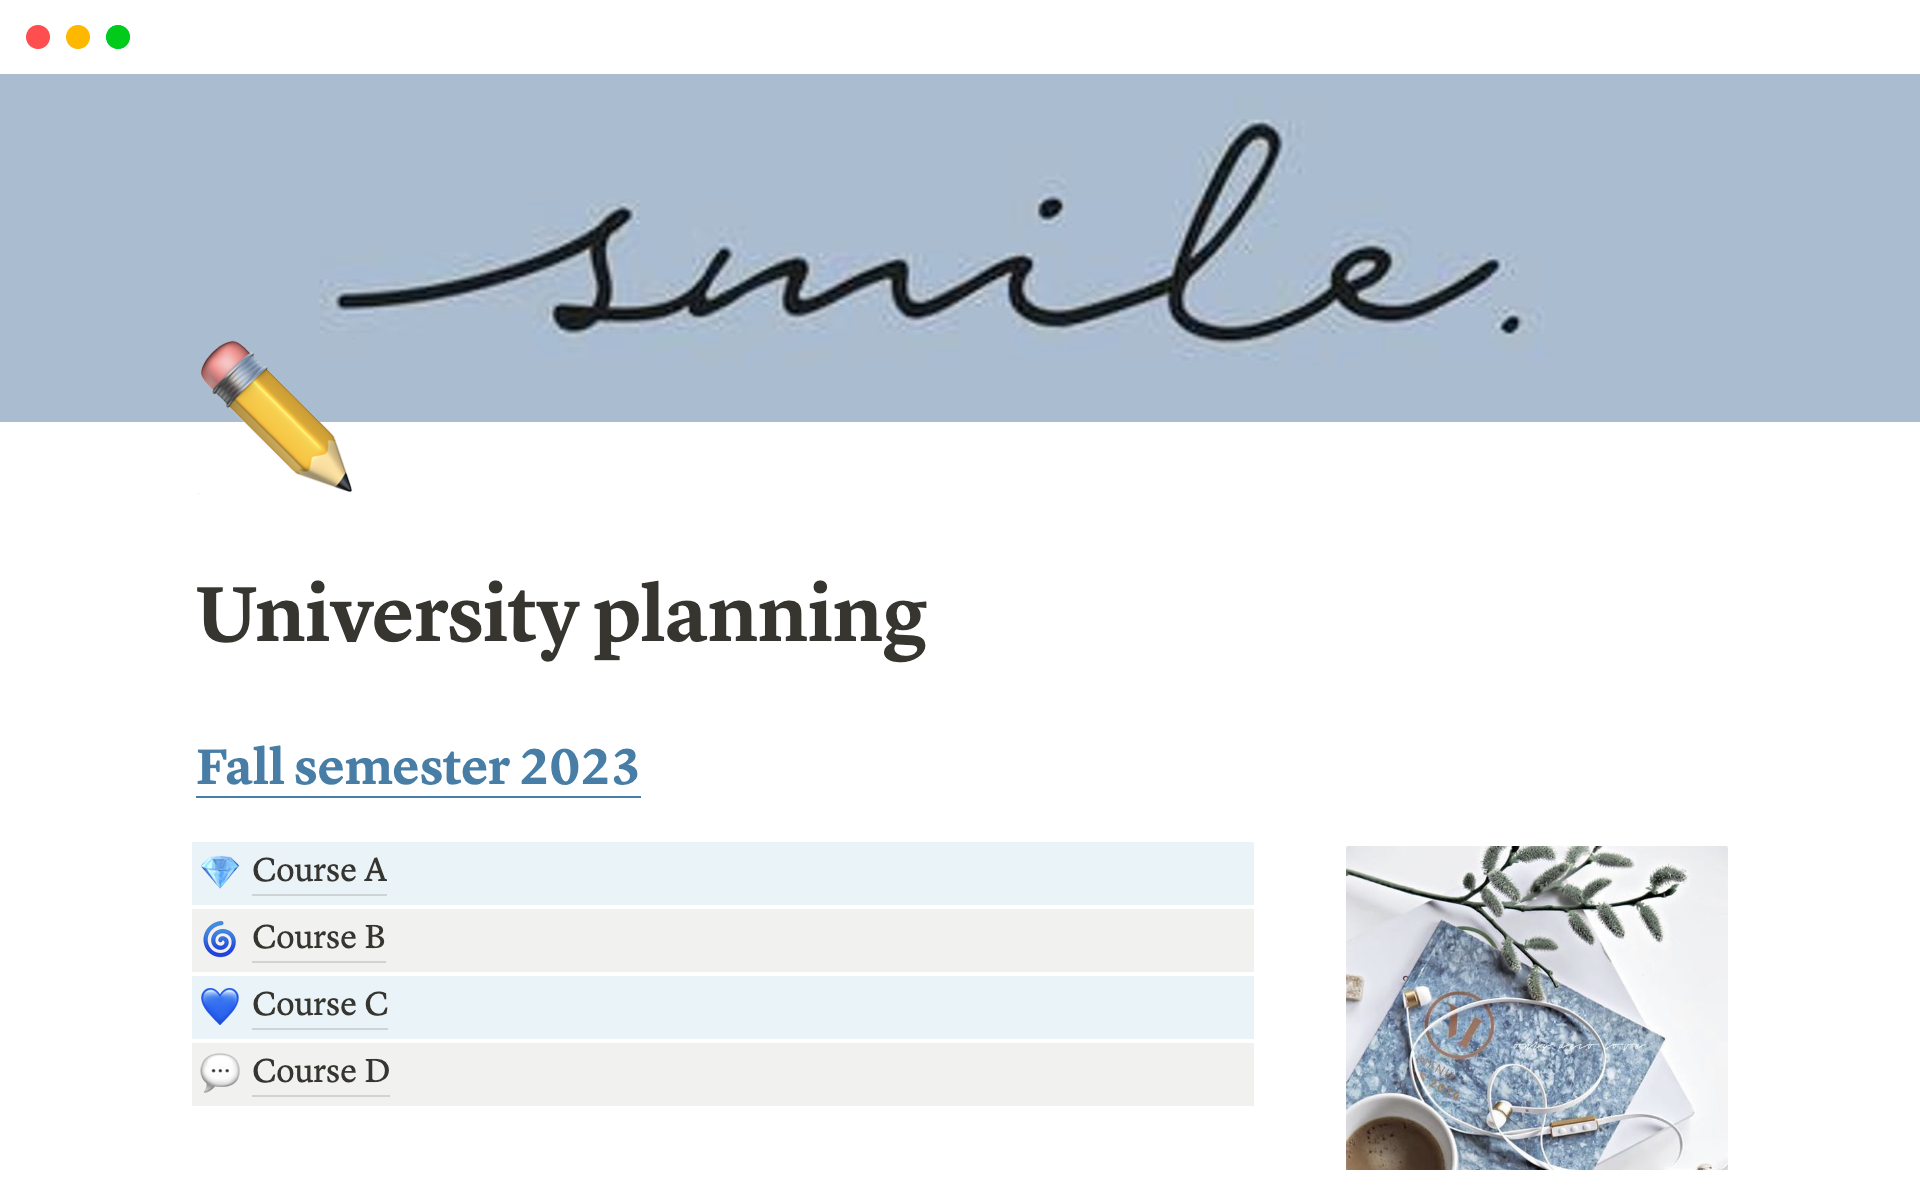 University planning template for organize all your student life